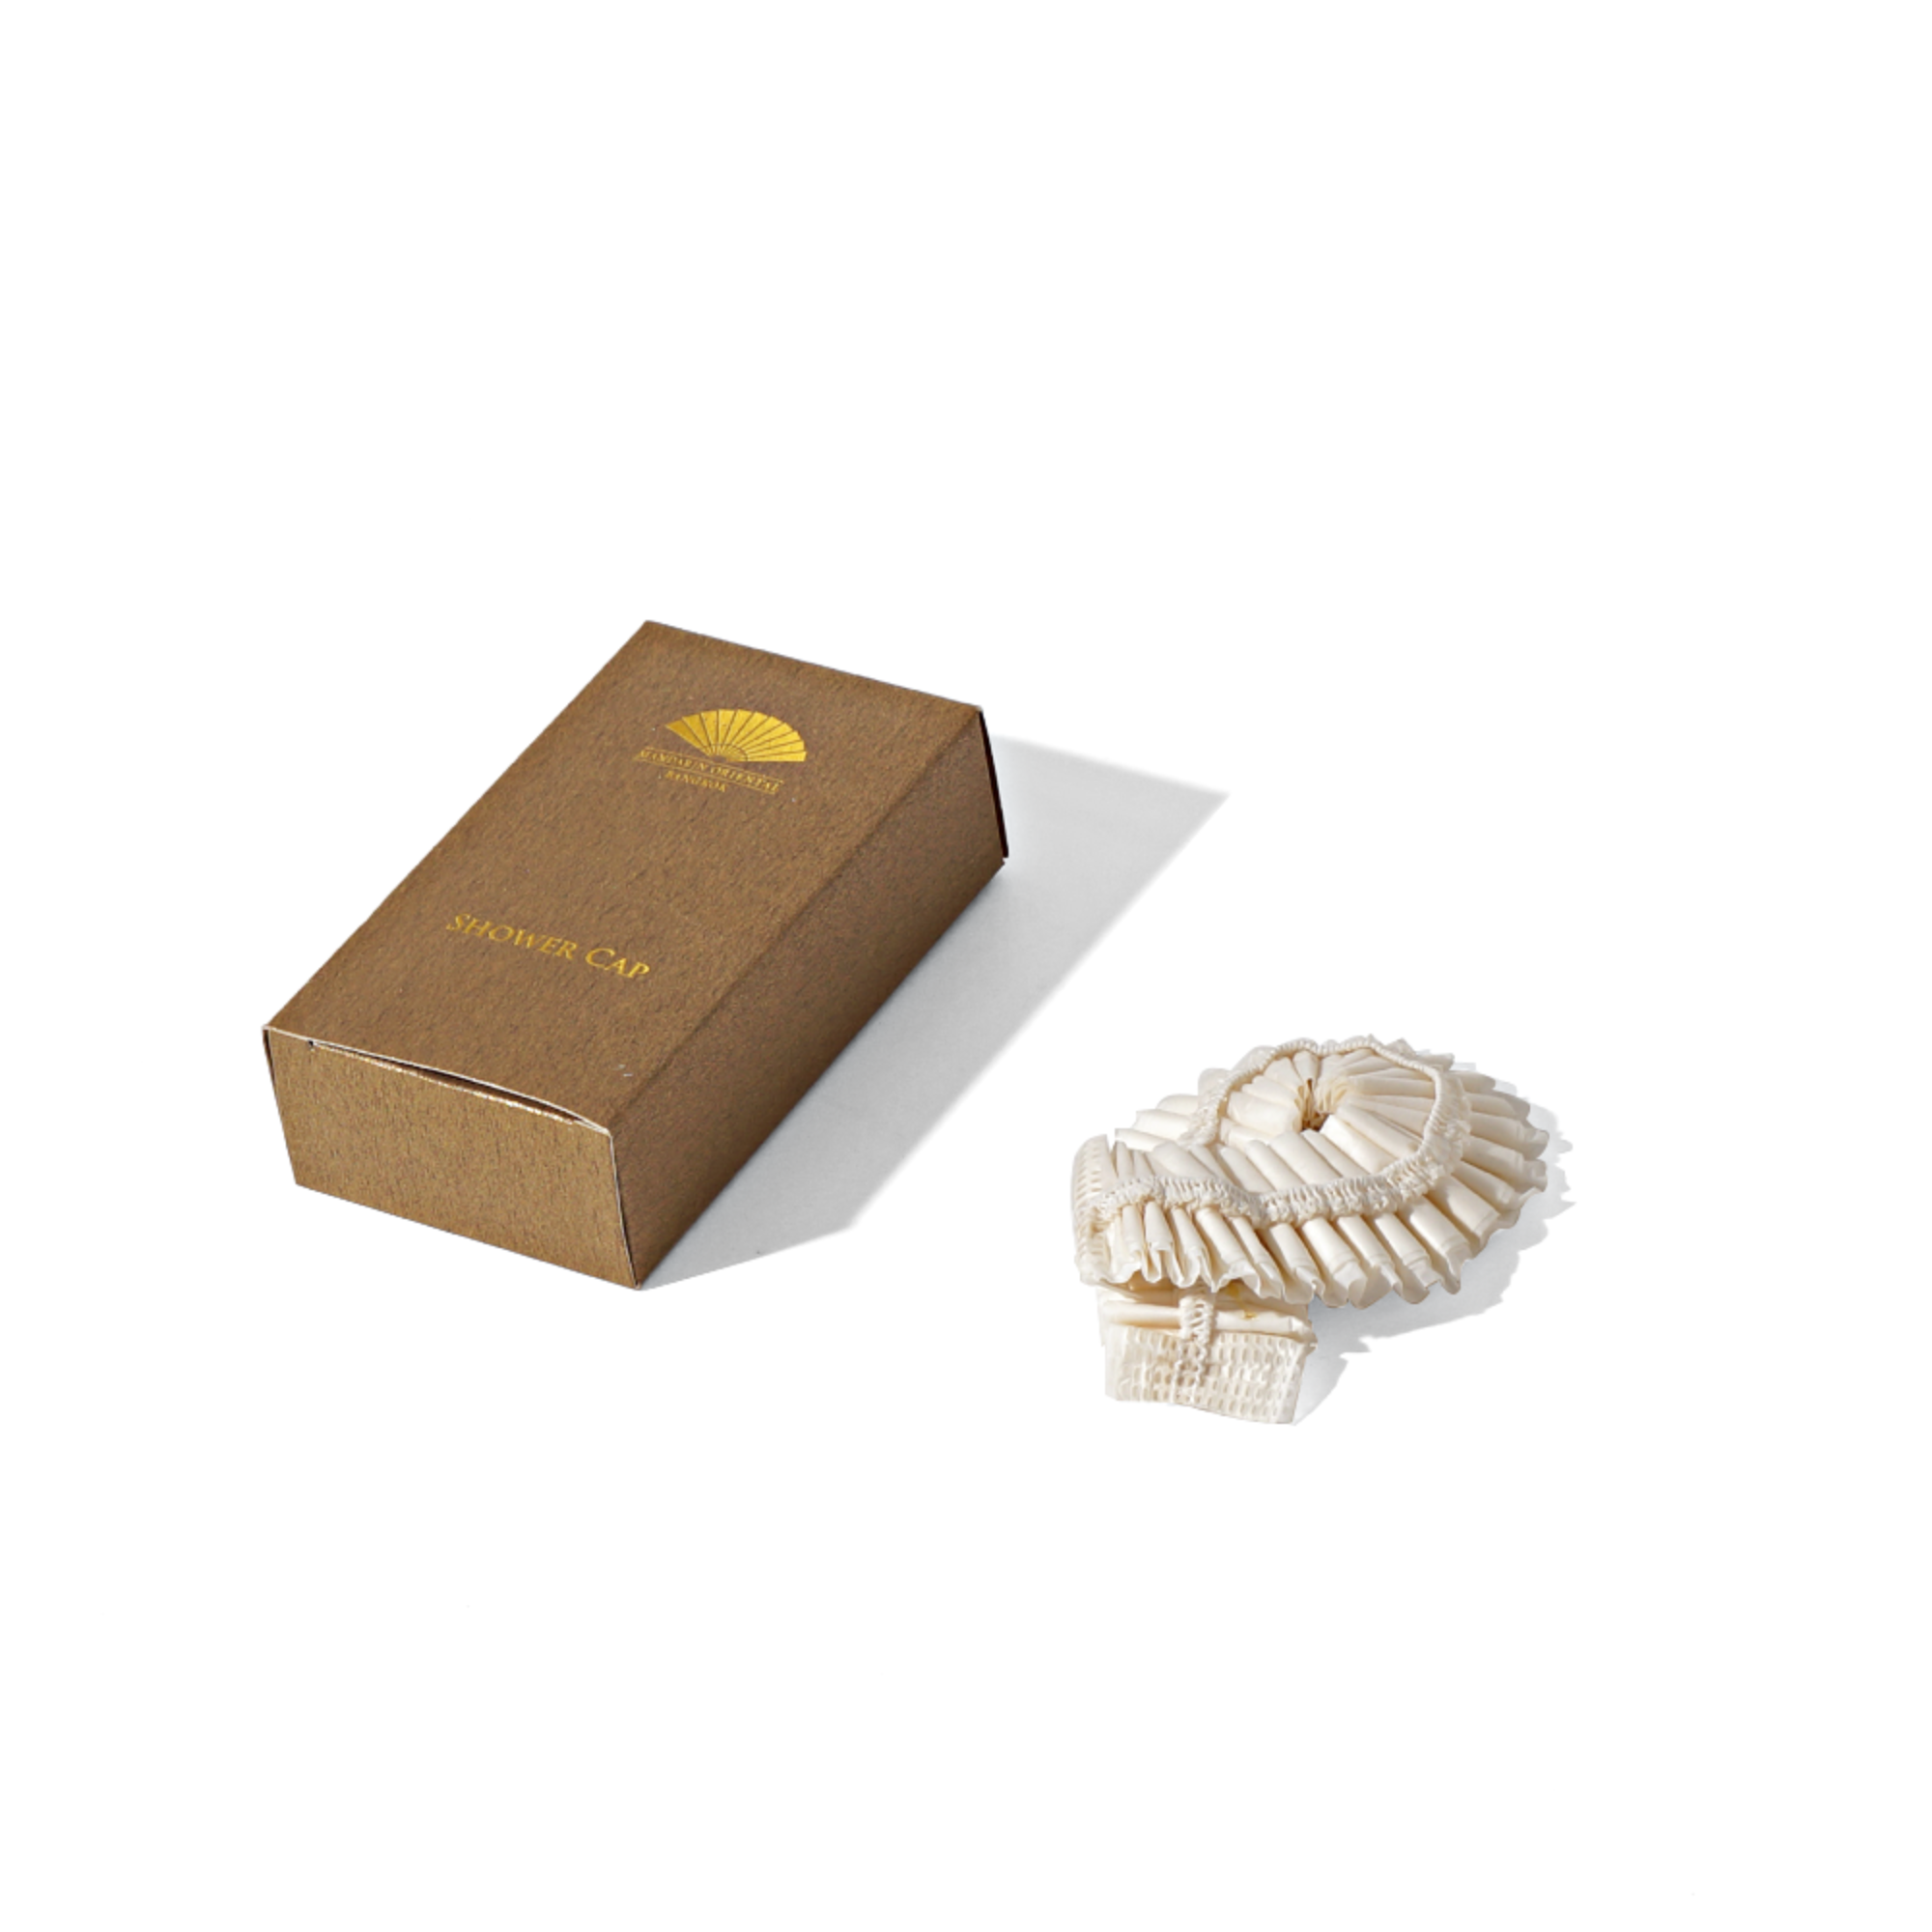 New Idea- Biodegradable Hotel Slippers& Luxury Box Packaging Hotel Amenities